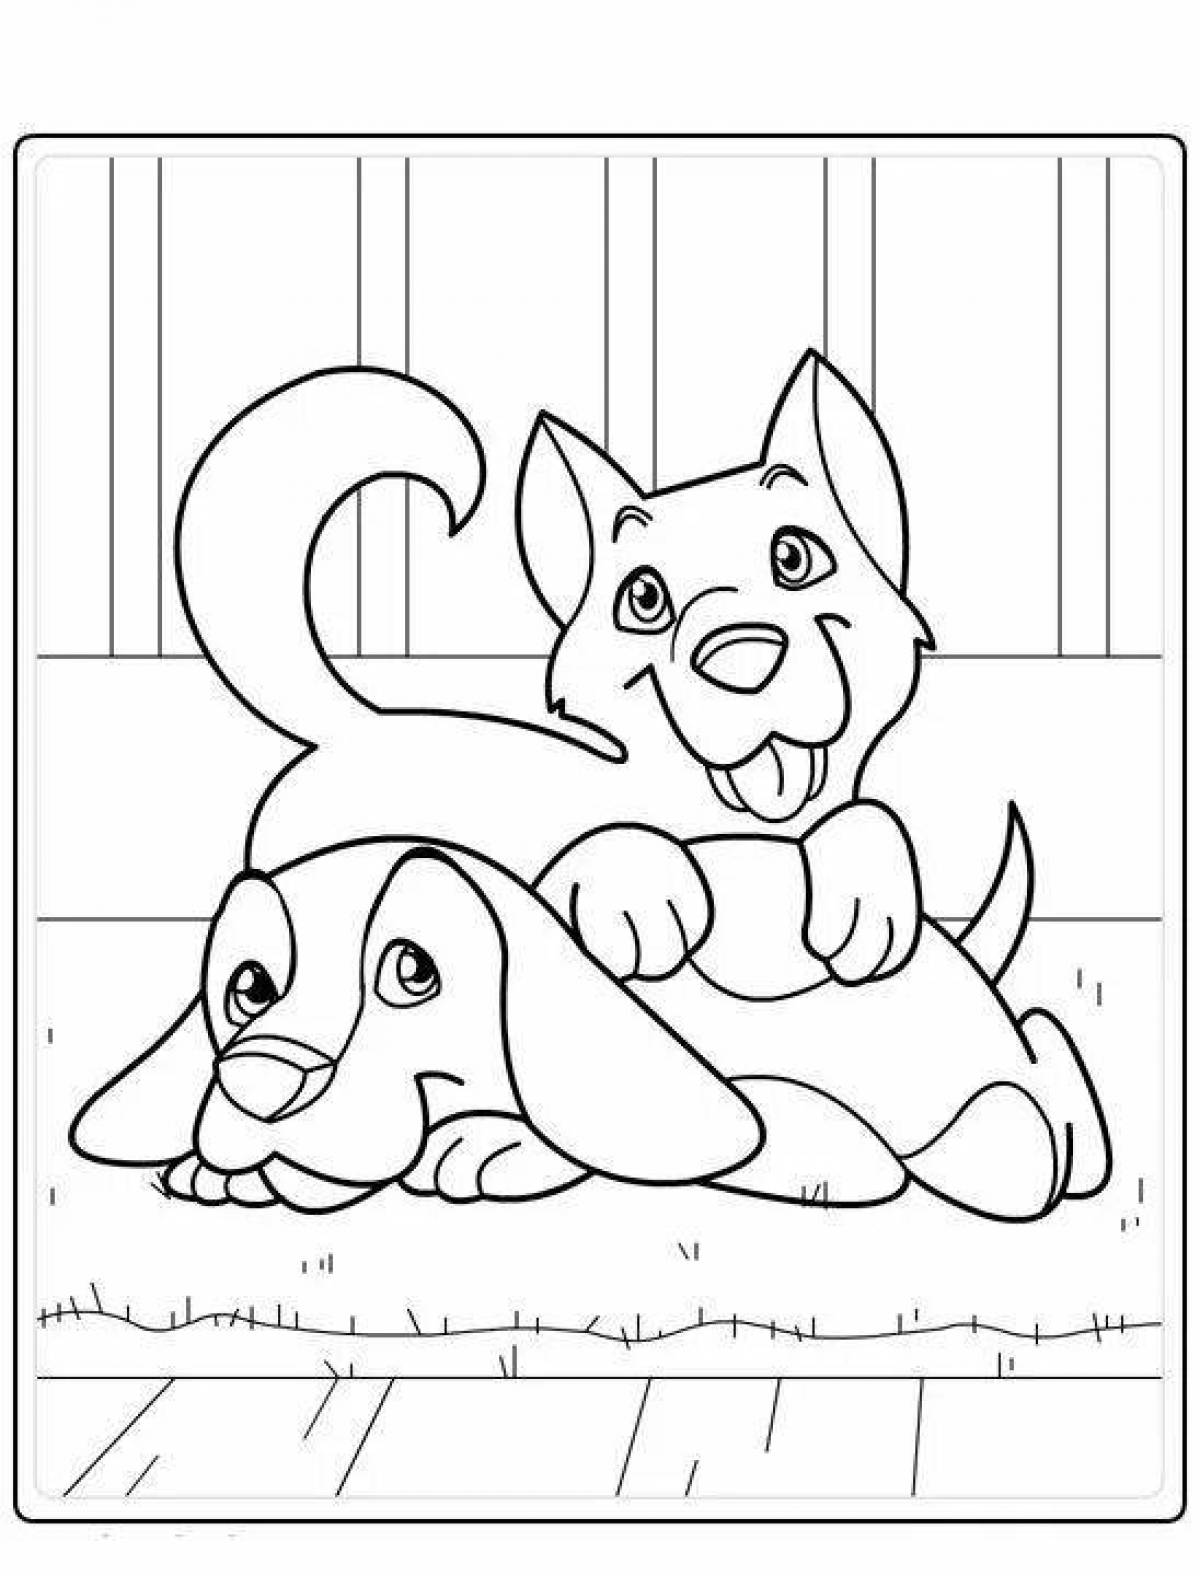 Coloring page affectionate kitten and puppy